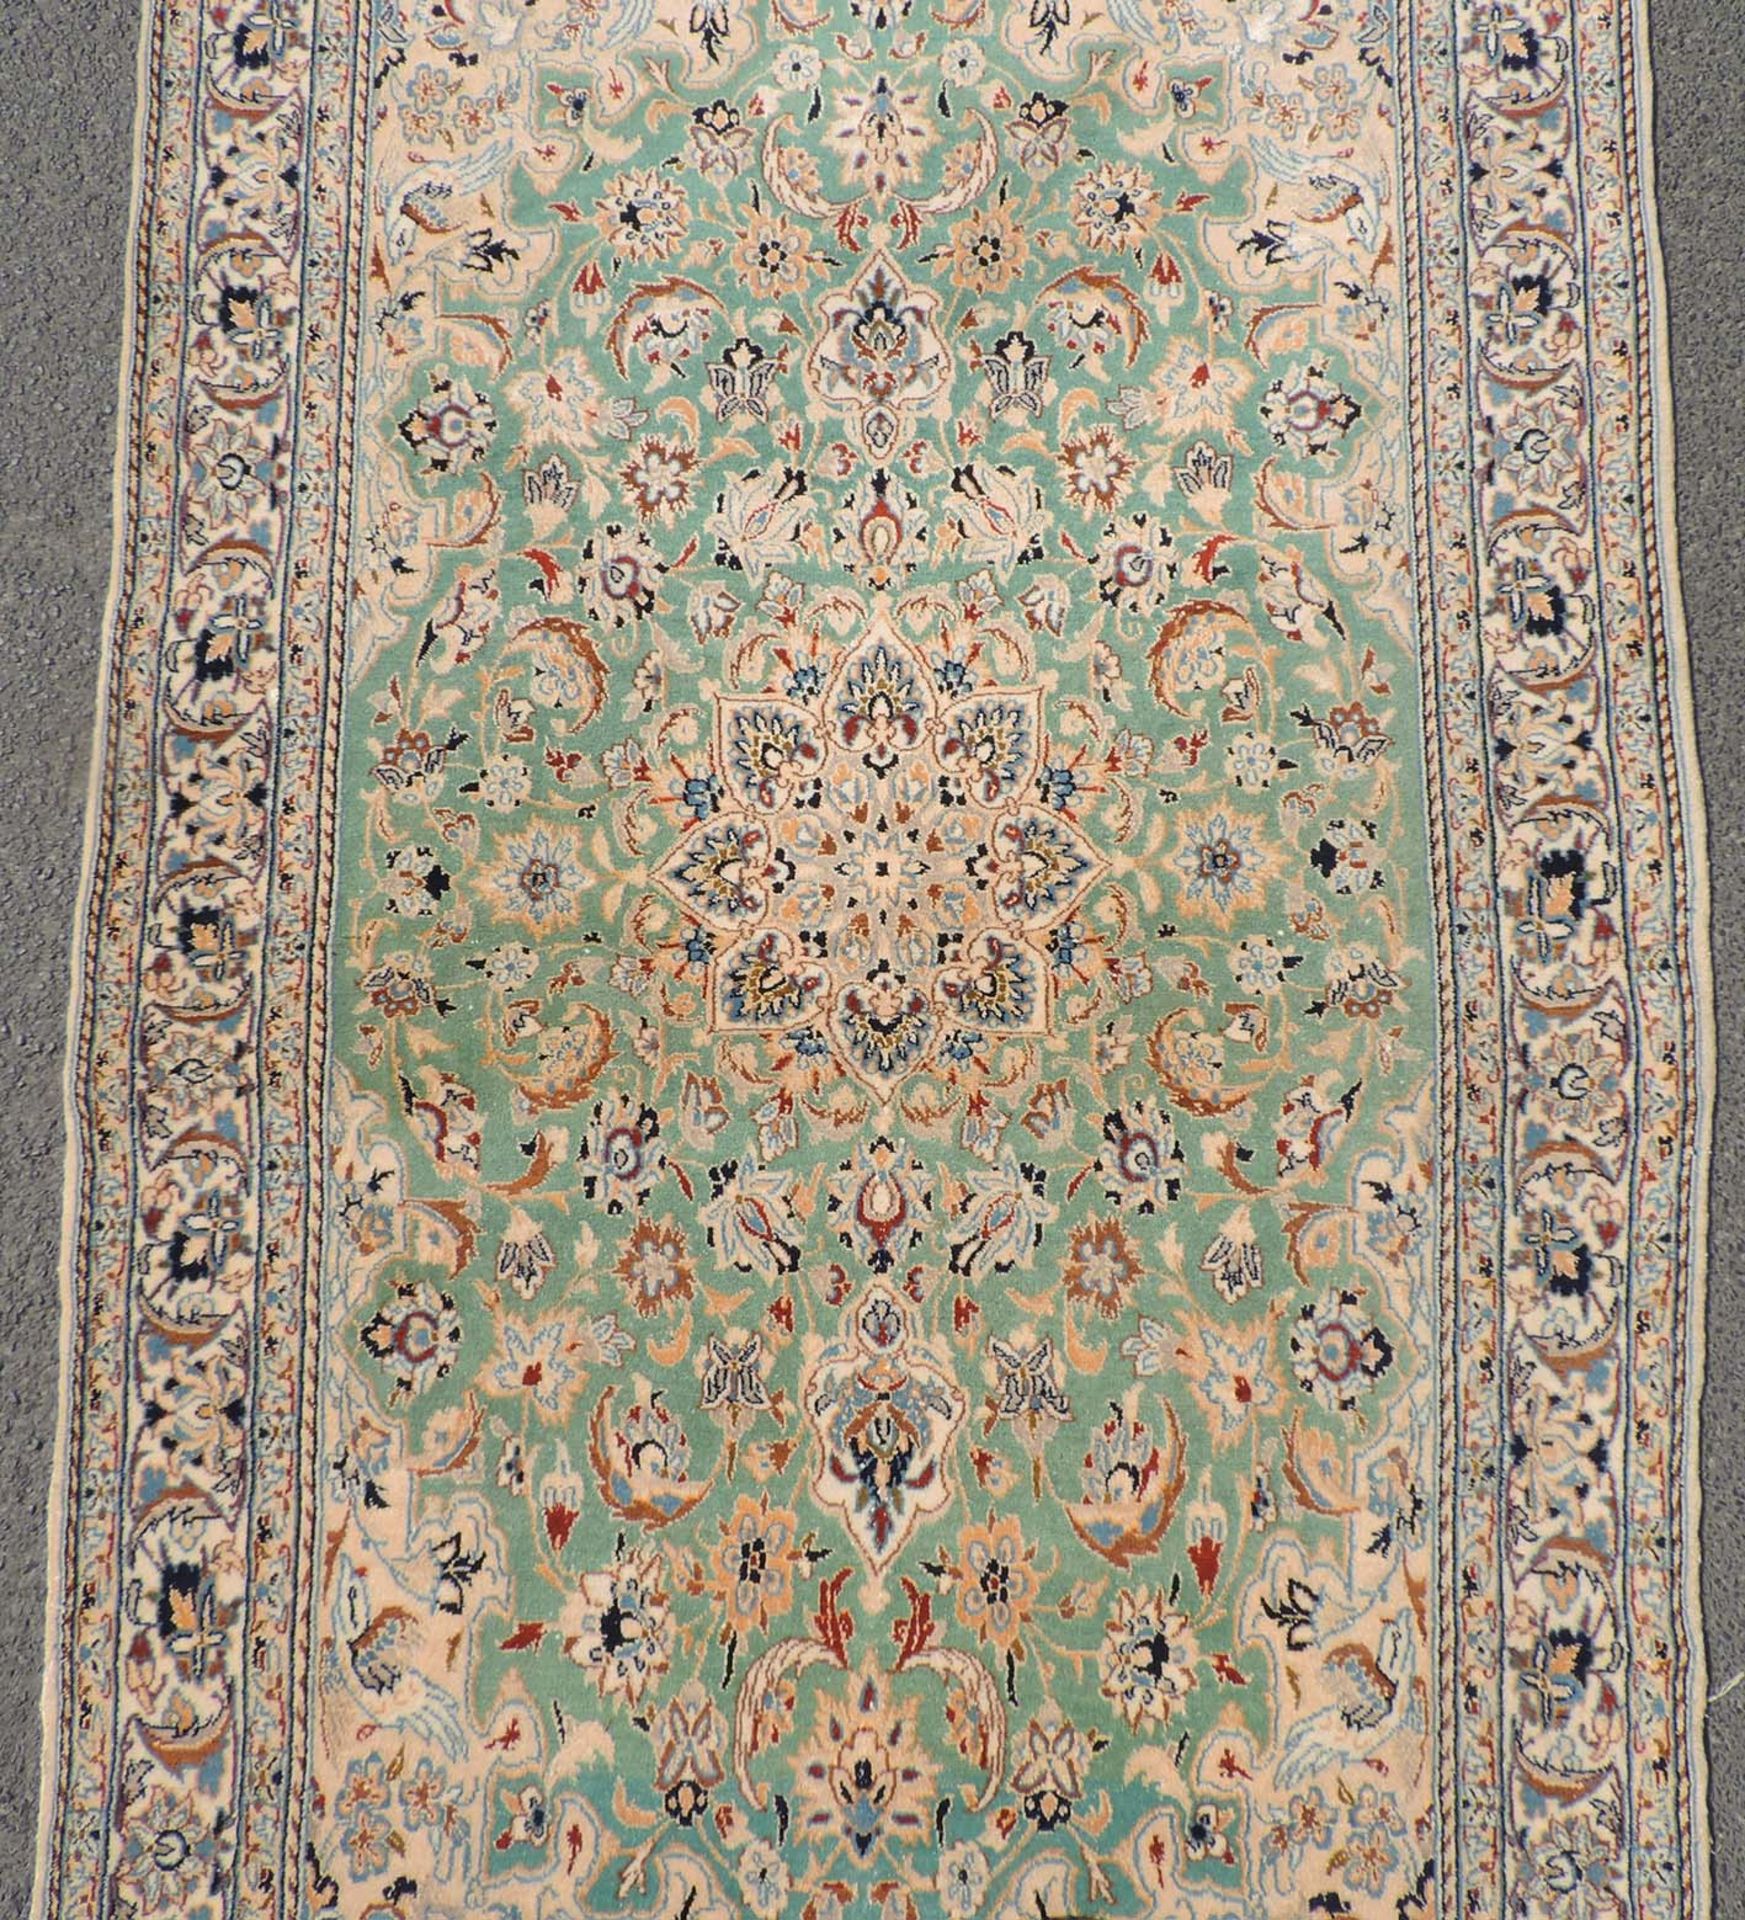 Nain Persian rug. Iran. Very fine weave.214 cm x 113 cm. Knotted by hand. Cork wool and silk on - Image 3 of 6